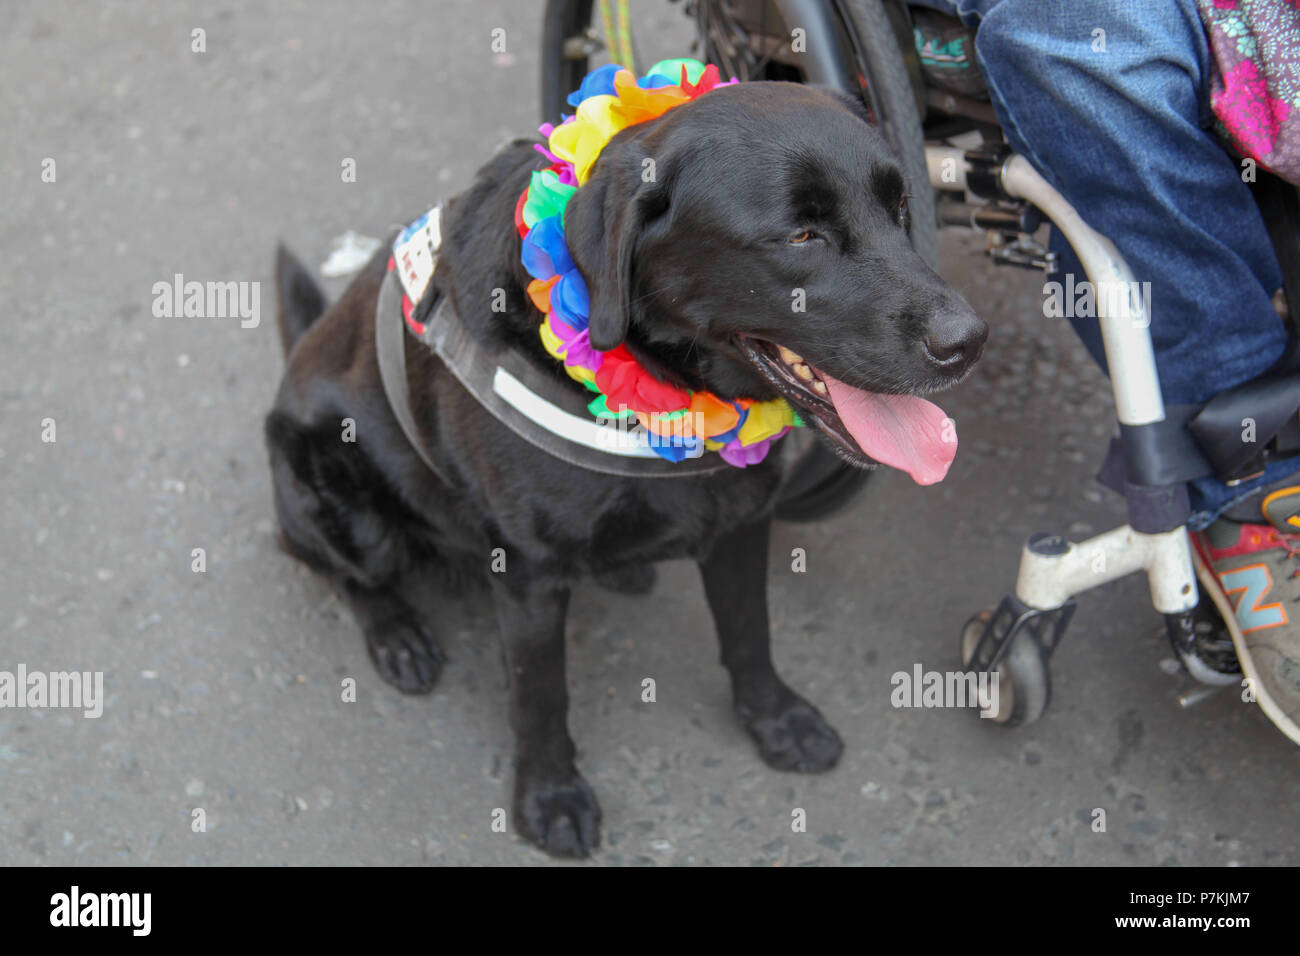 London, UK. 7th July 2018. Dog supporting Pride in London Credit: Alex Cavendish/Alamy Live News Stock Photo